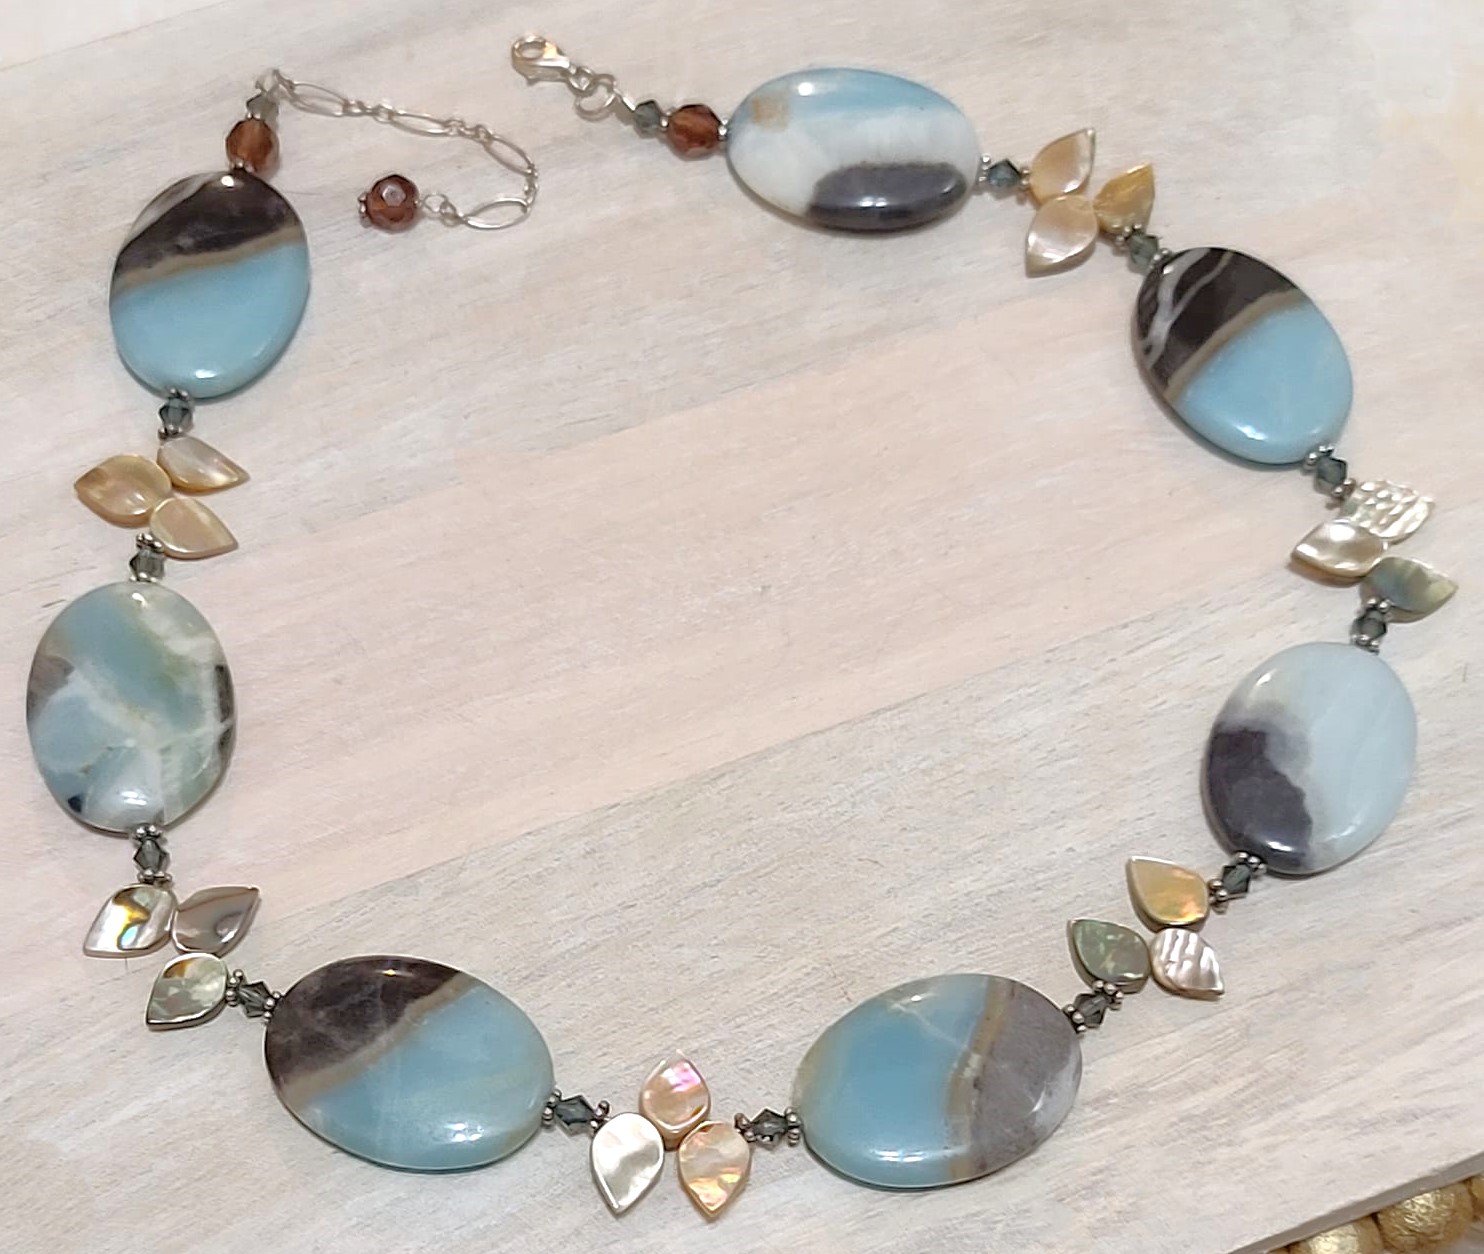 Gemstone necklace, amazonite, abalone shell, austrian crystals accents with sterling silver clasp/extender